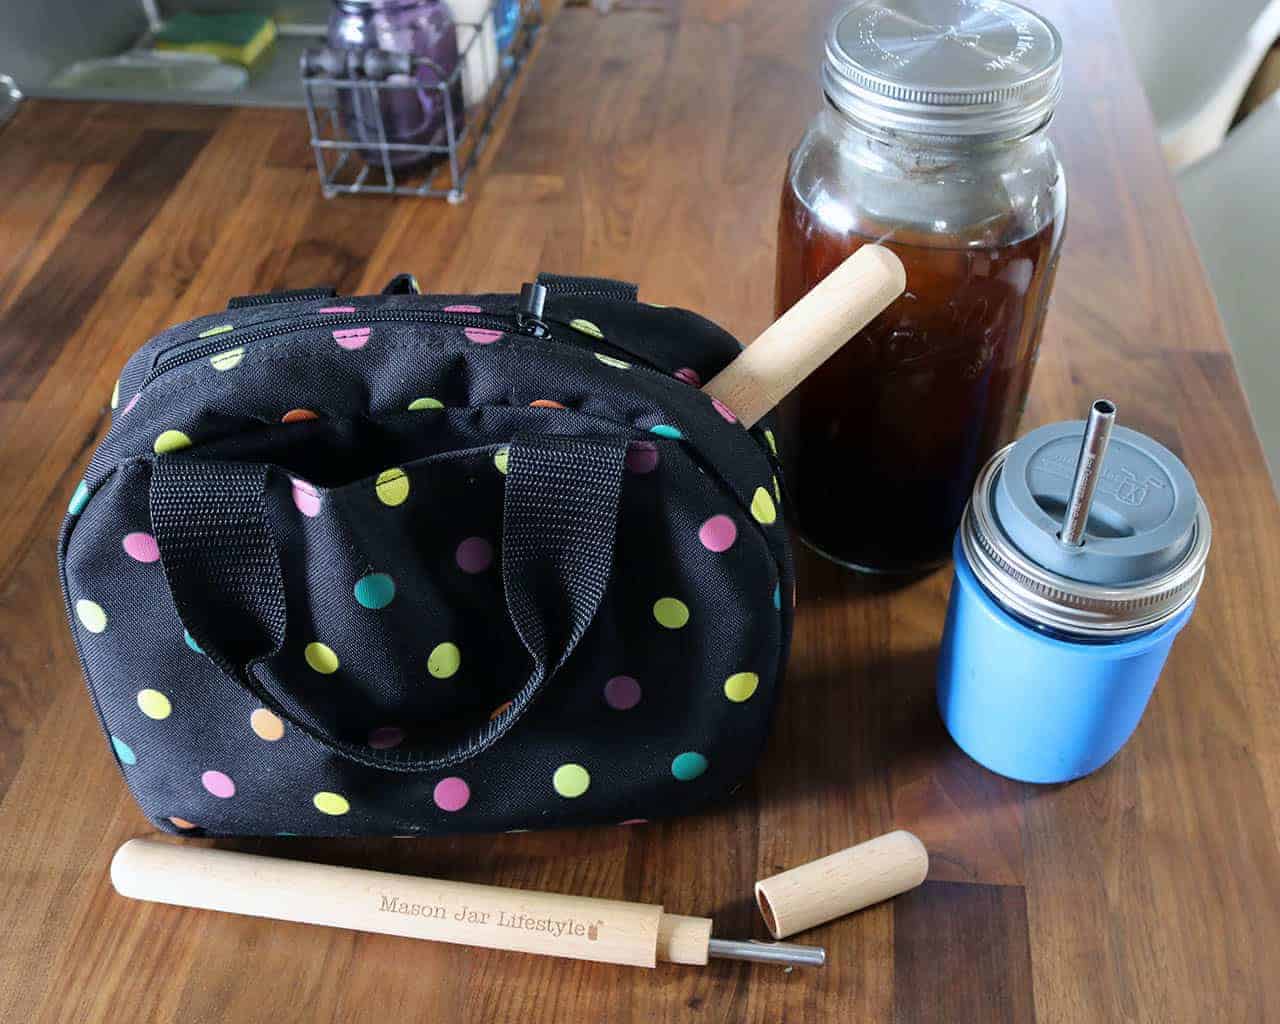 https://masonjarlifestyle.com/cdn/shop/files/wood-straw-carrying-case-beech-food-safe-oil-bag-wide-mouth-pint-cold-brew-coffee-safer-stainless-steel-straw-mason-jar-lifestyle.jpg?v=1695767110&width=1400